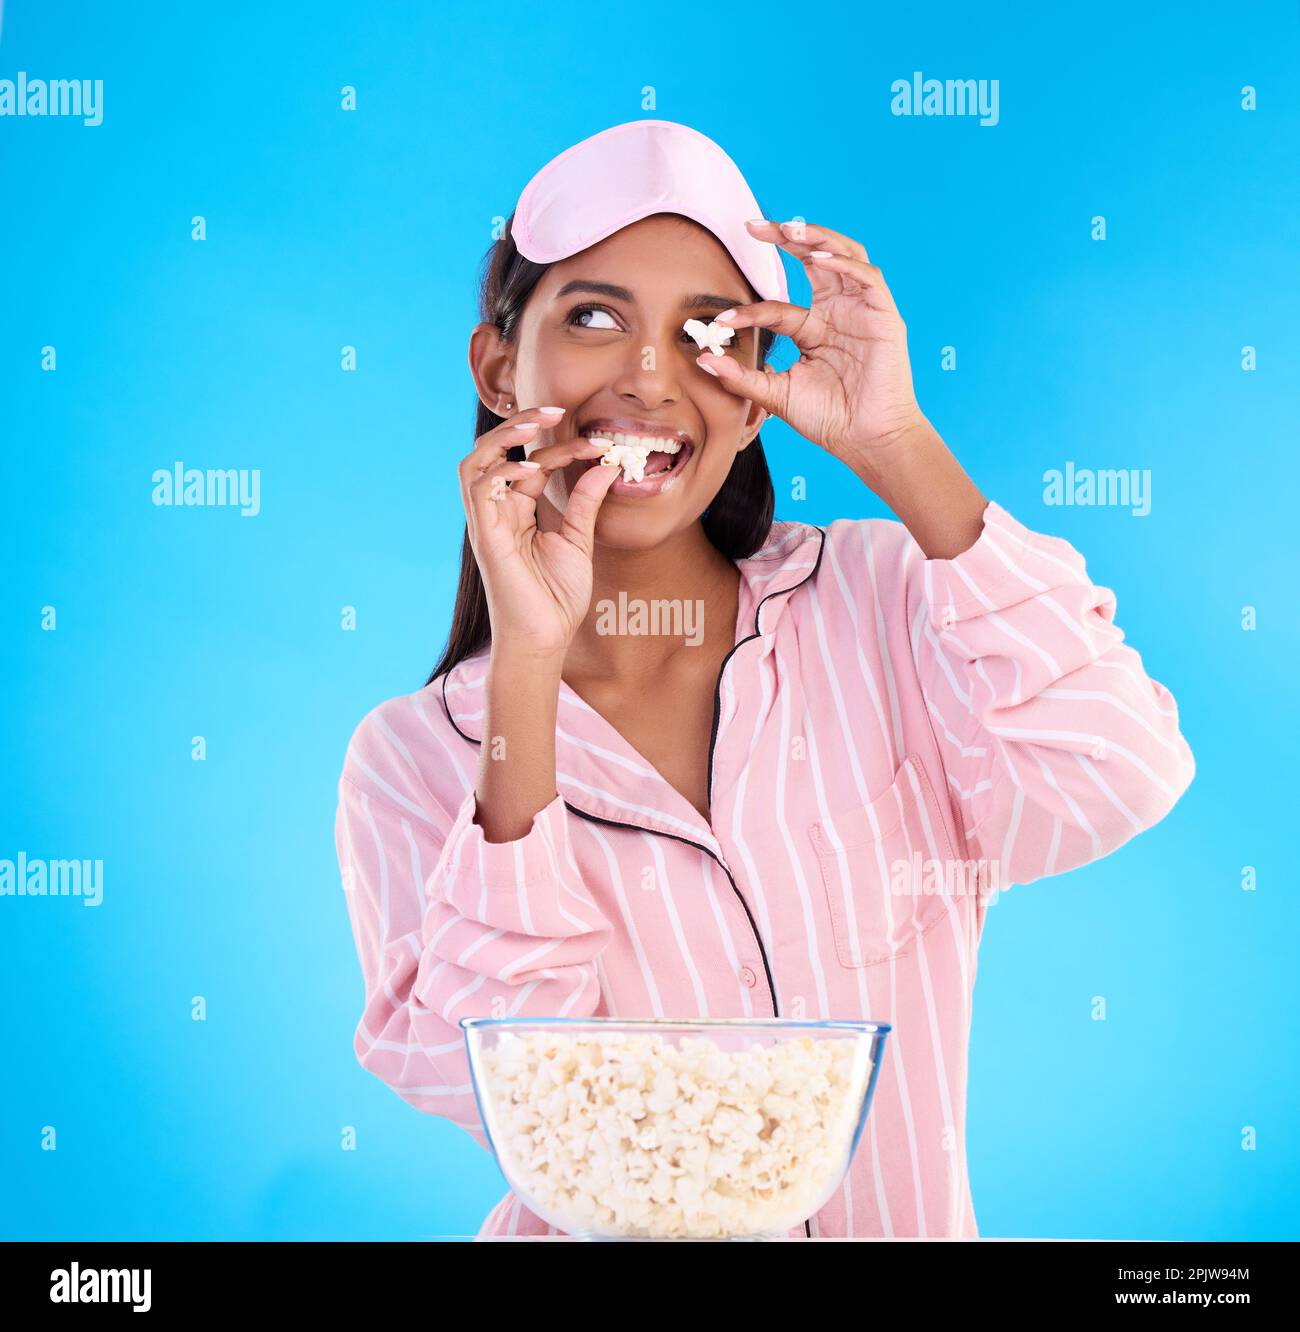 Popcorn, pajamas and playful with a woman on a blue background in studio watching a movie for entertainment. Fun, video and night with an attractive Stock Photo